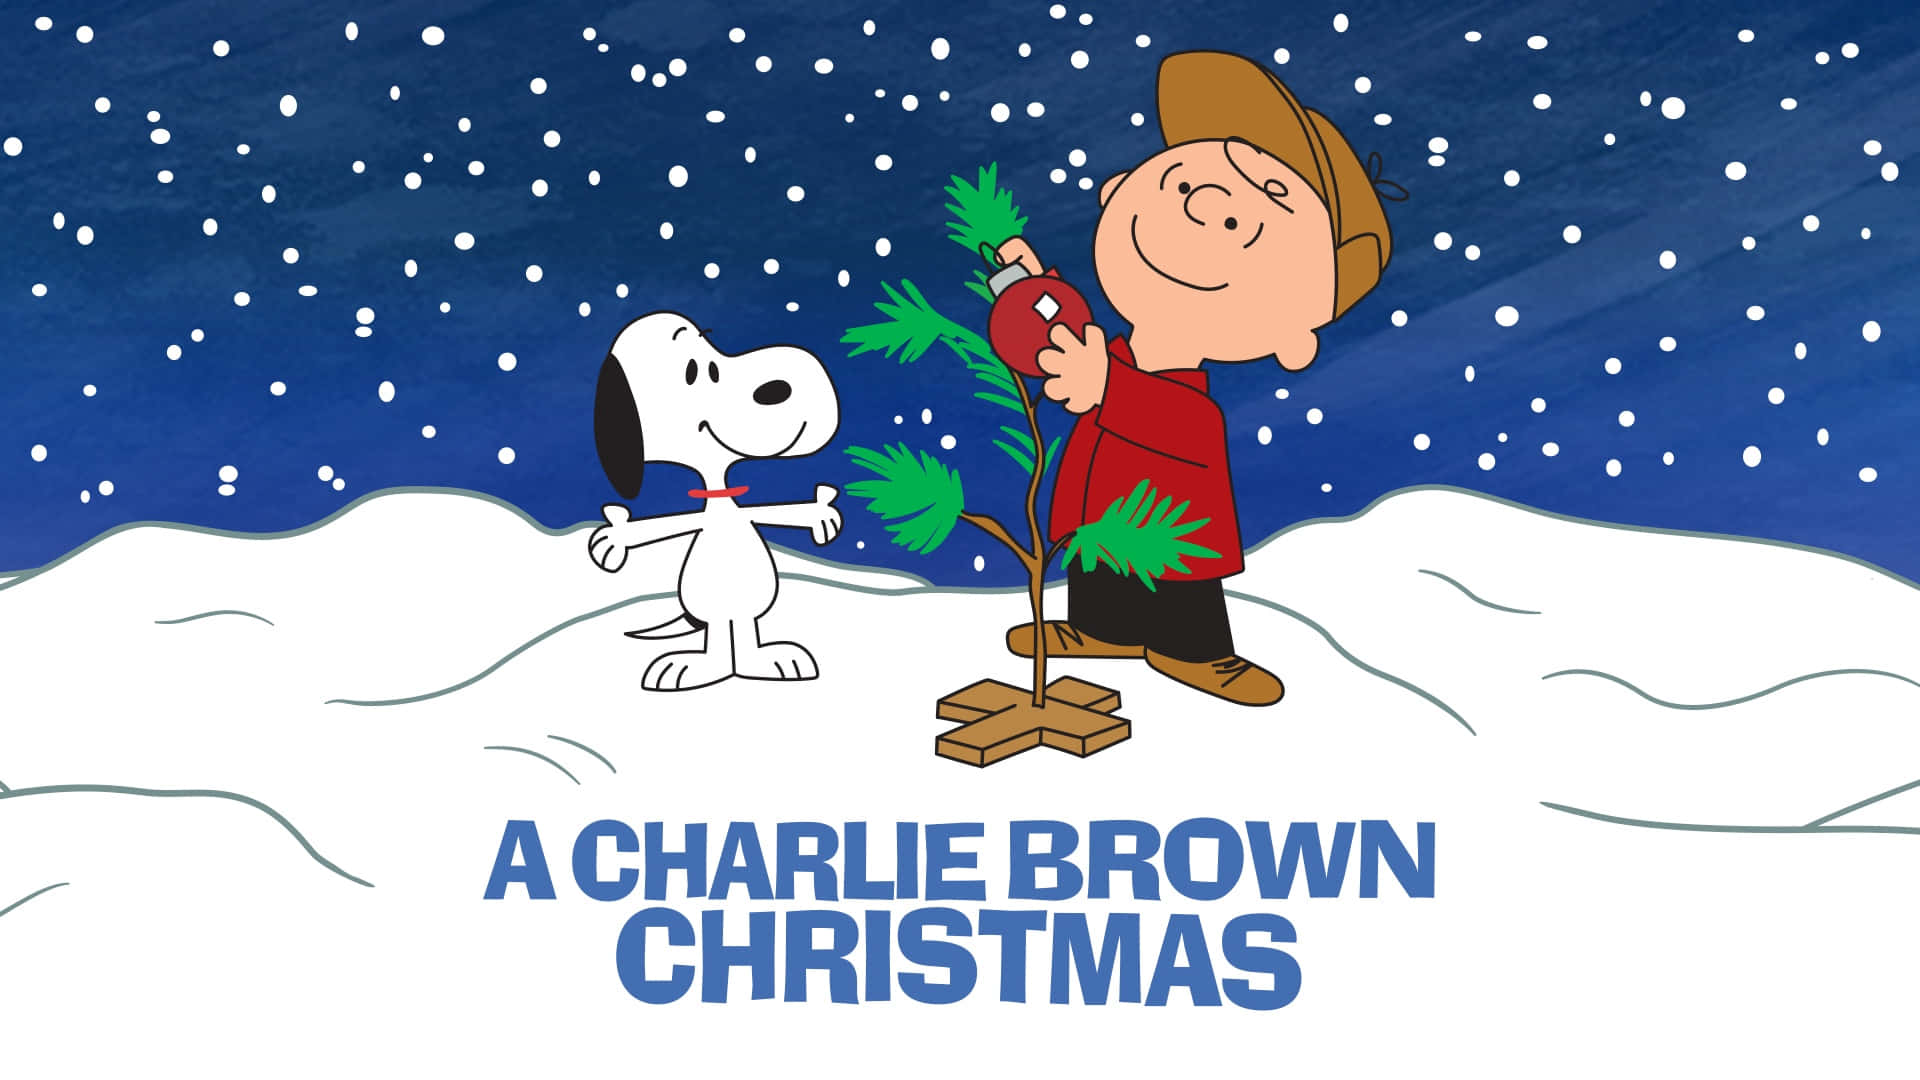 Charlie Brown Christmas Tree Wallpaper 43 pictures